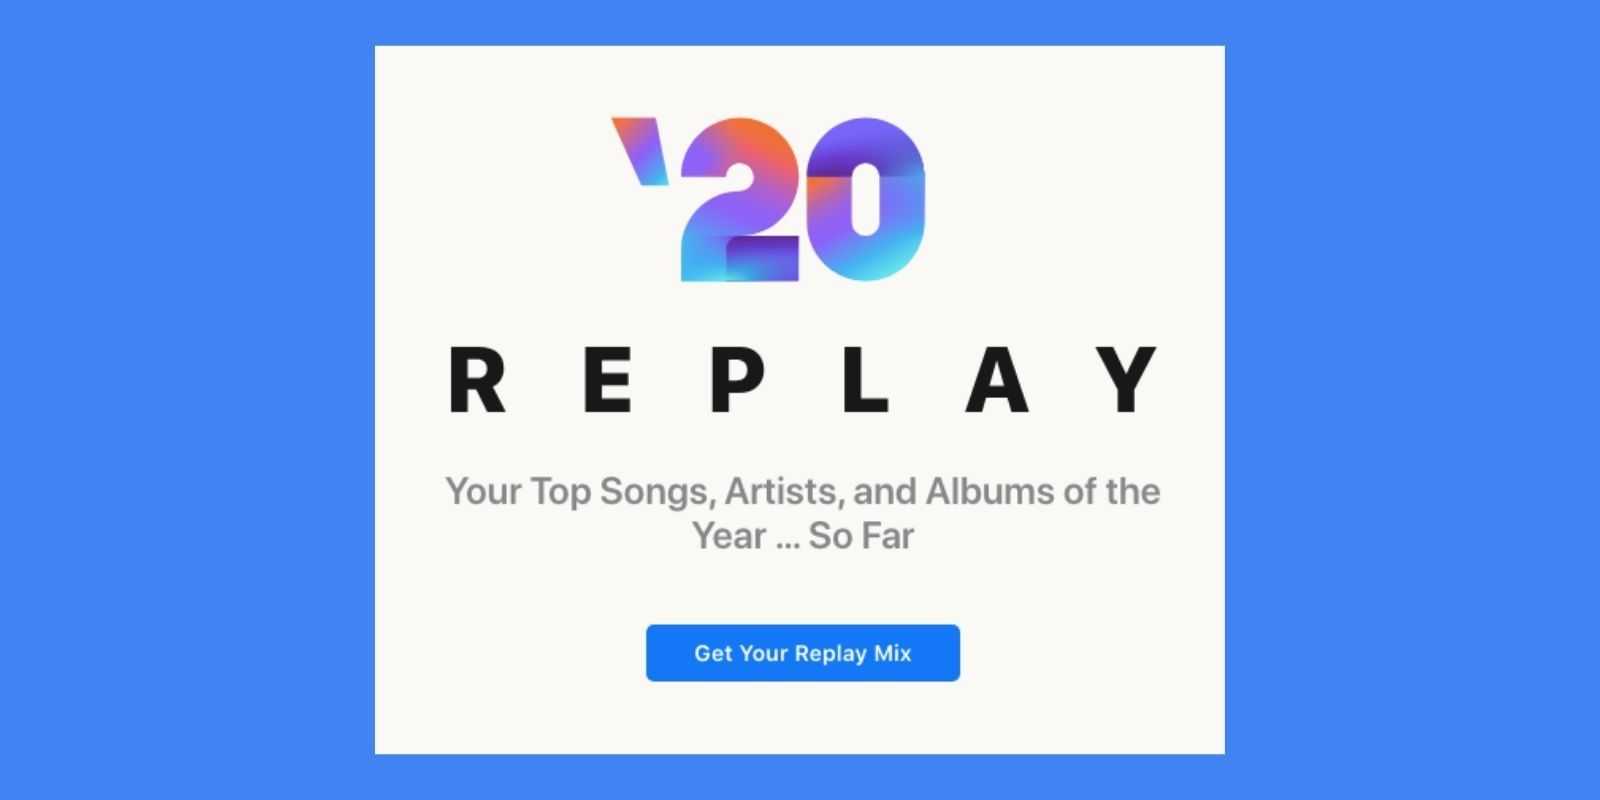 How To Find & Use Your Apple Music Replay 2021 Playlist